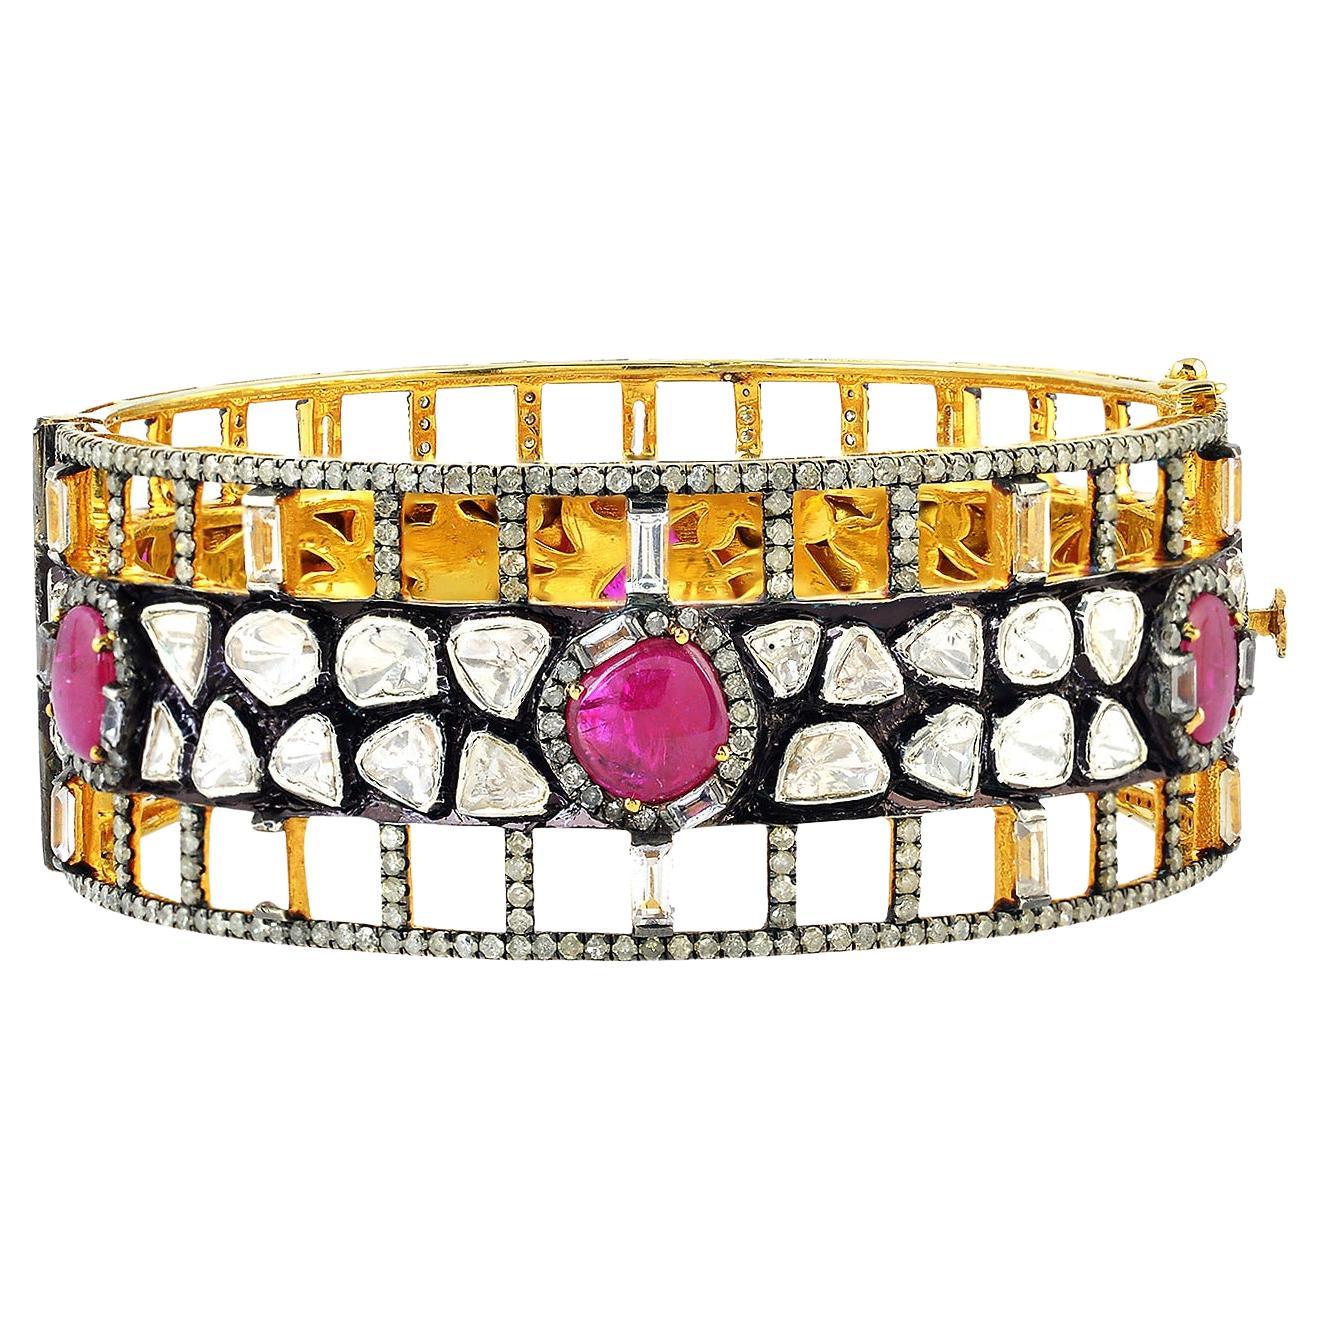 Ruby & Sapphire Cuff Bracelet With Grill & Diamonds in 18k Gold